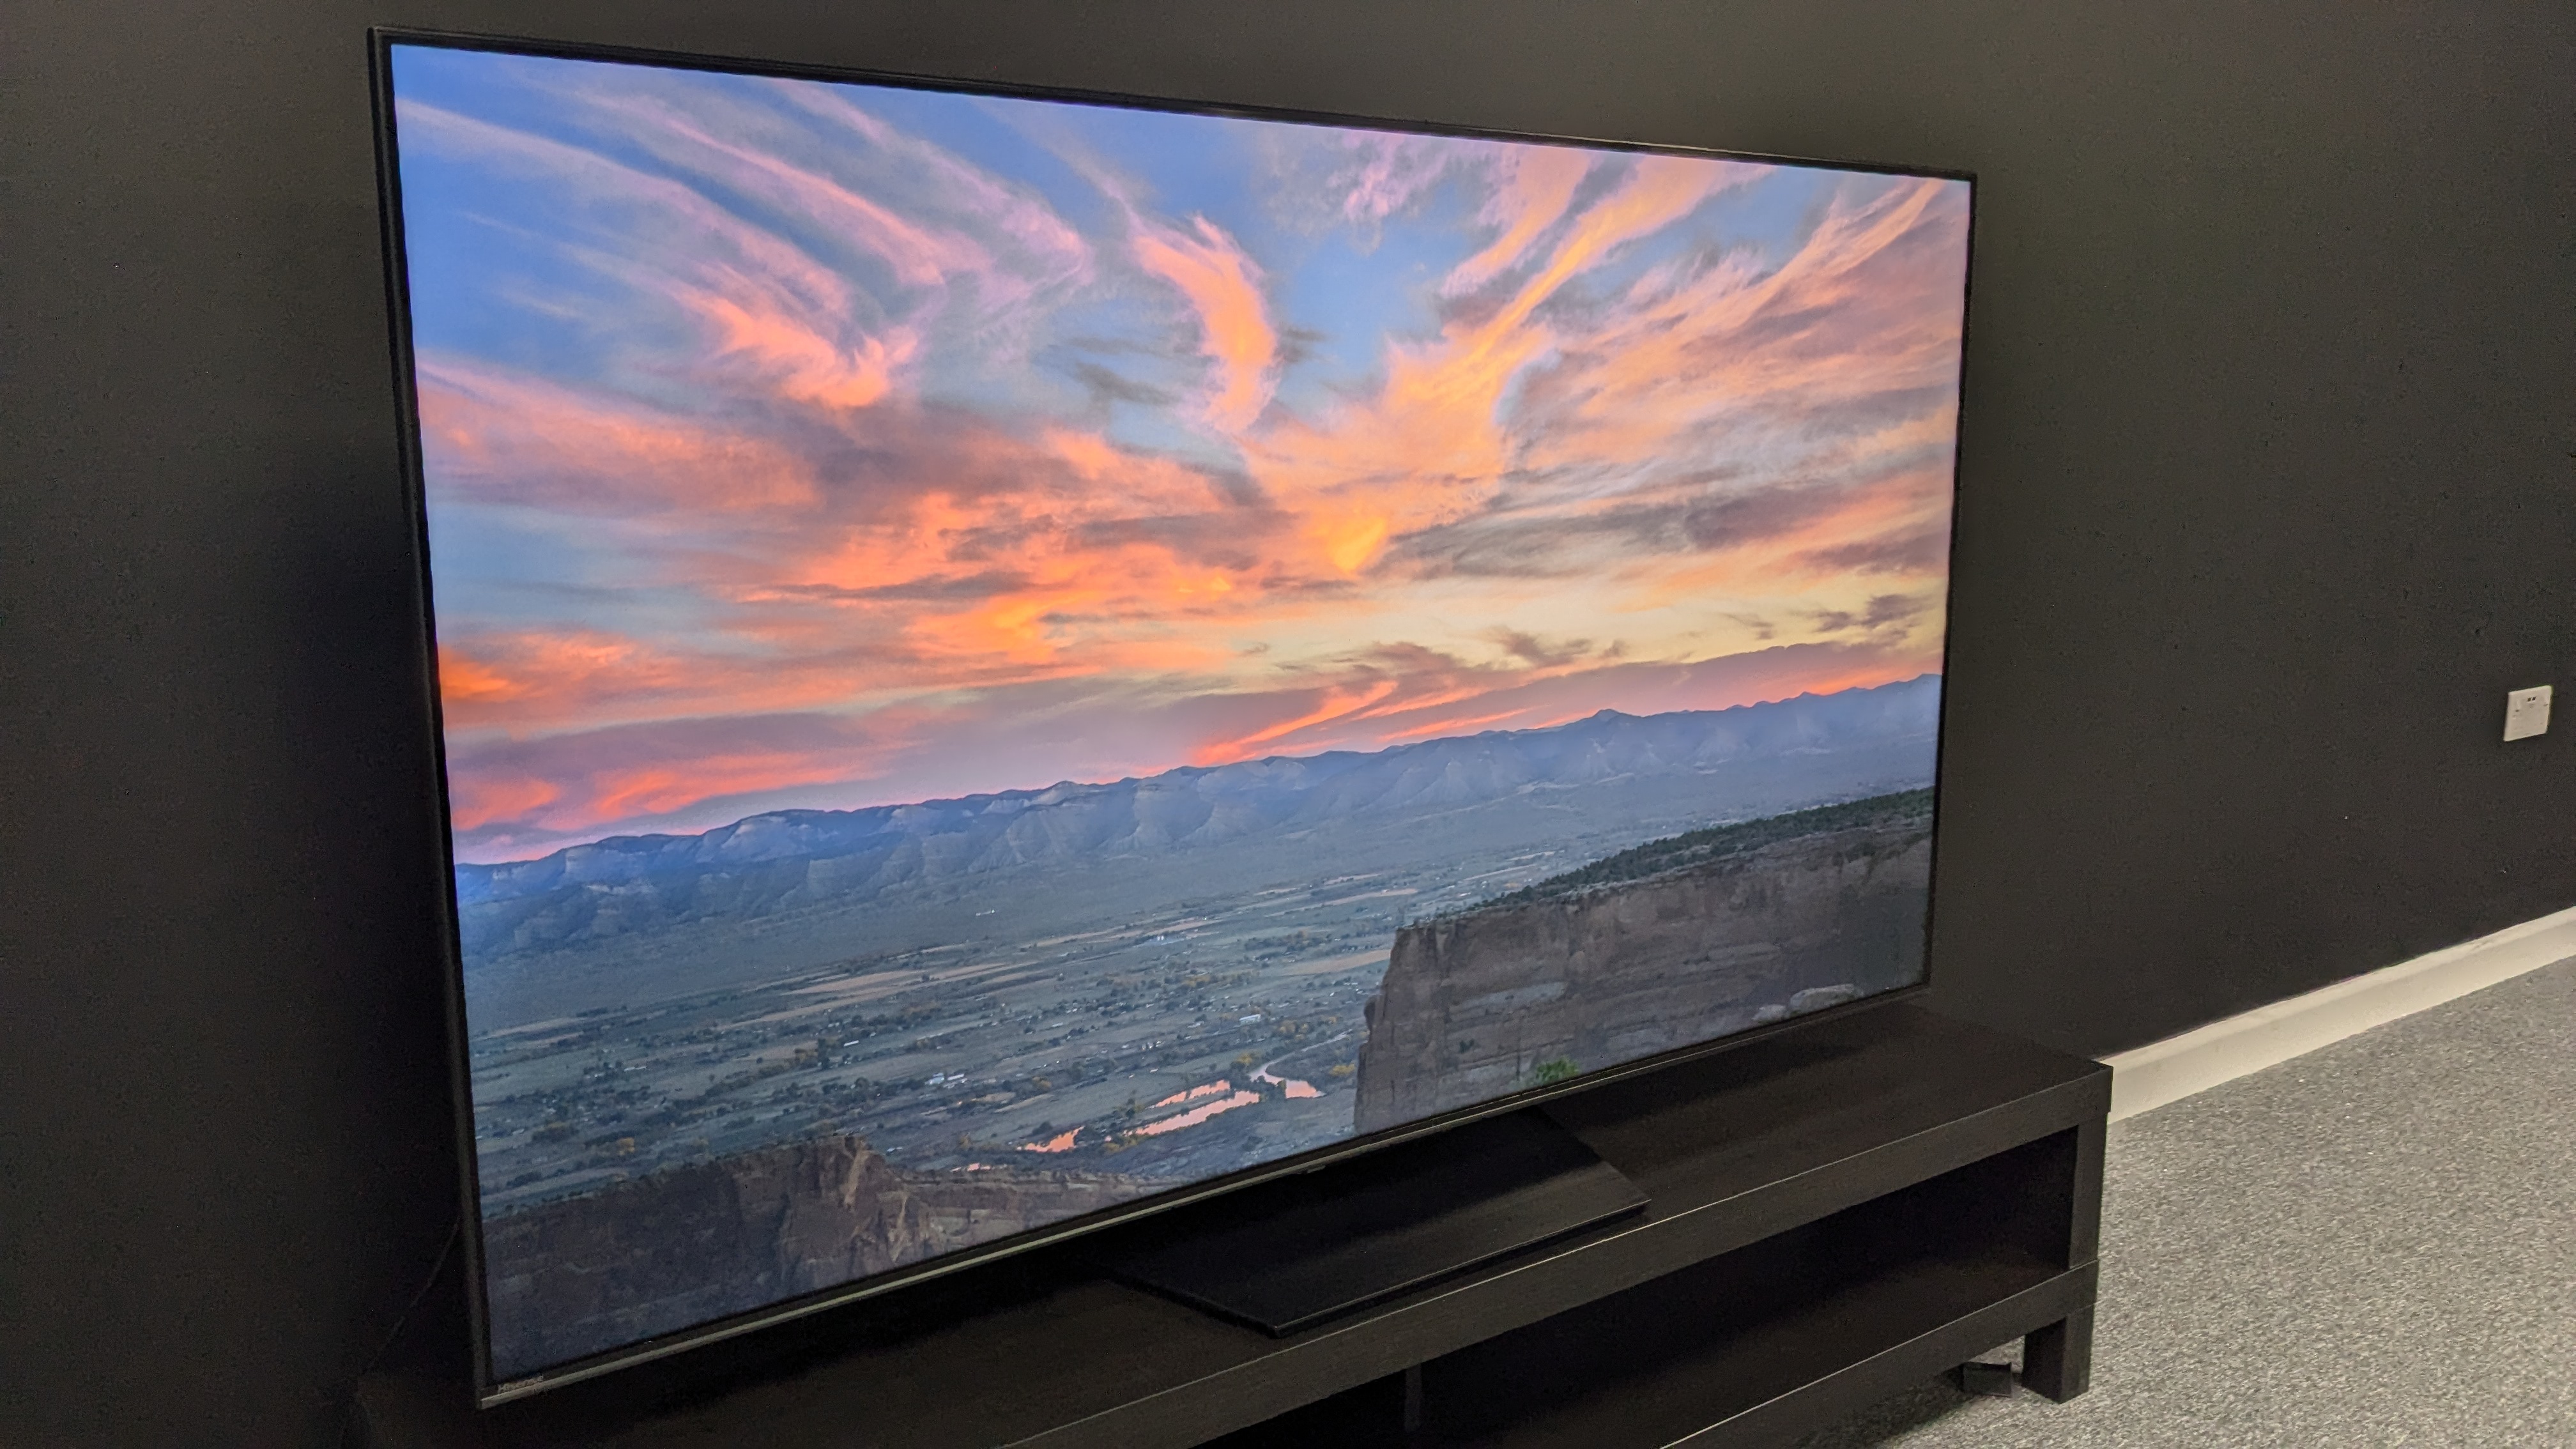 Hisense U7N review: a budget mini-LED 4K TV that out-performs its price